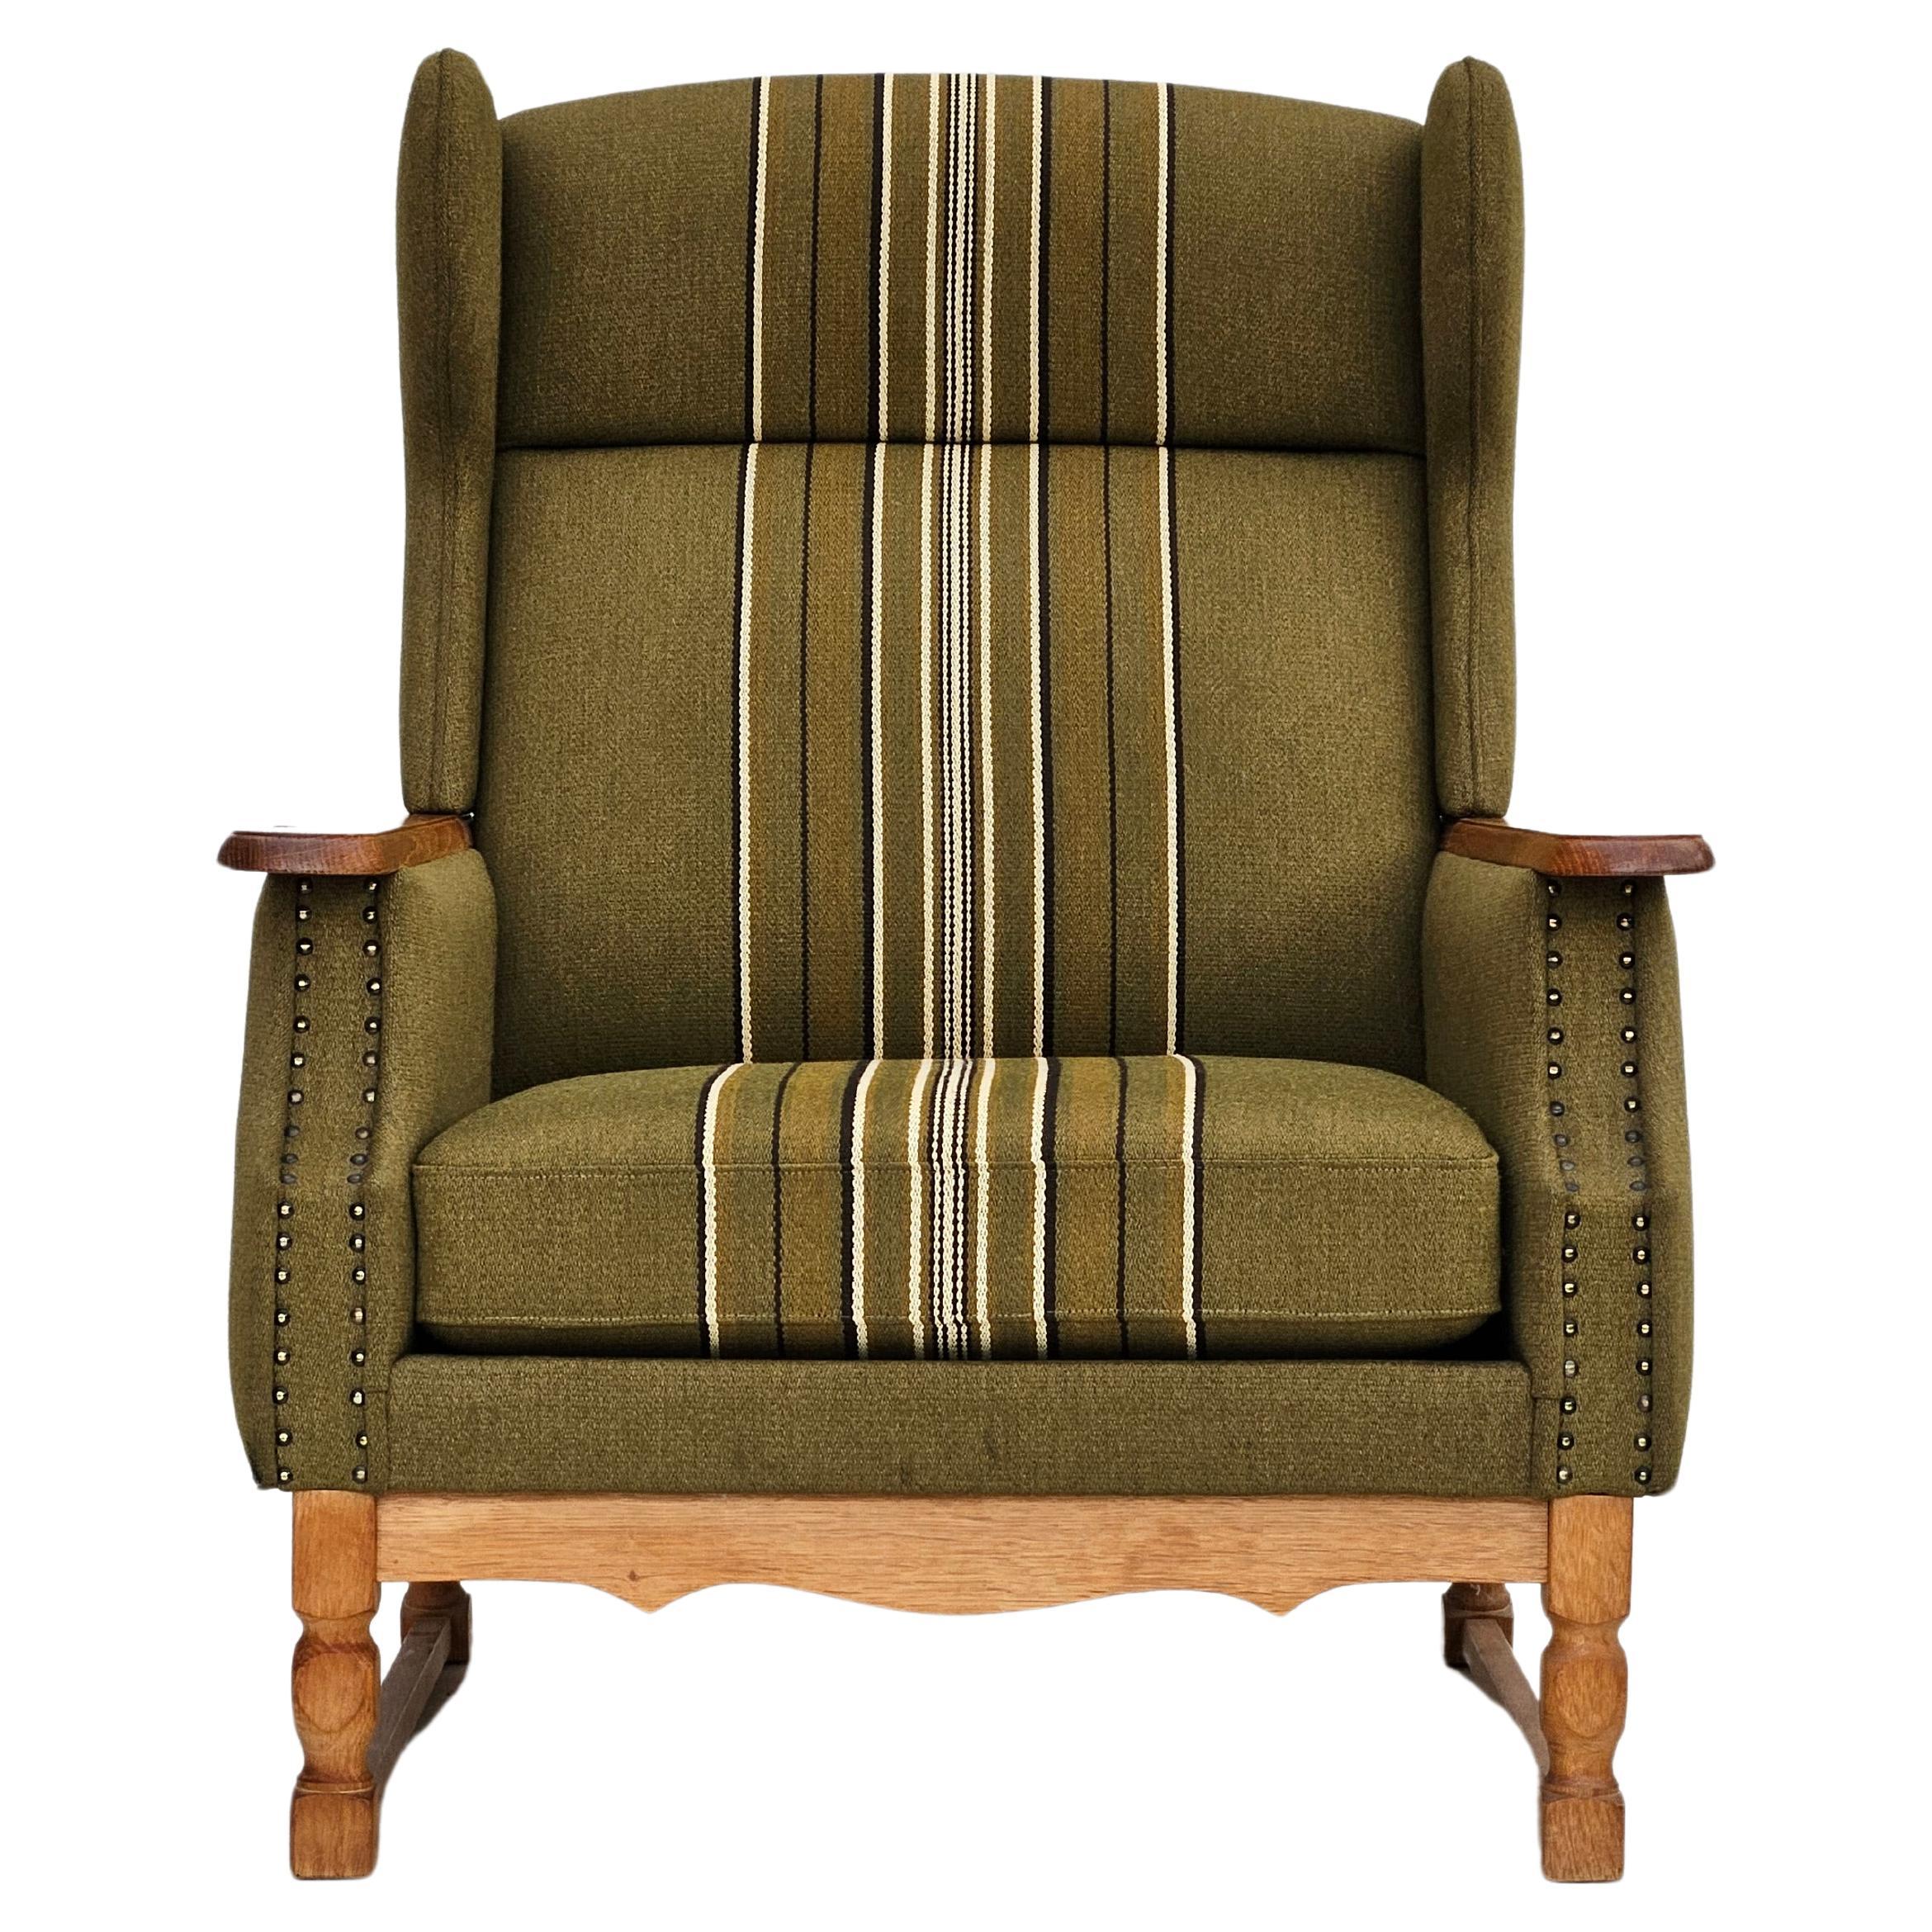 1970s, Danish wingback chair, original upholstery, green furniture wool. For Sale